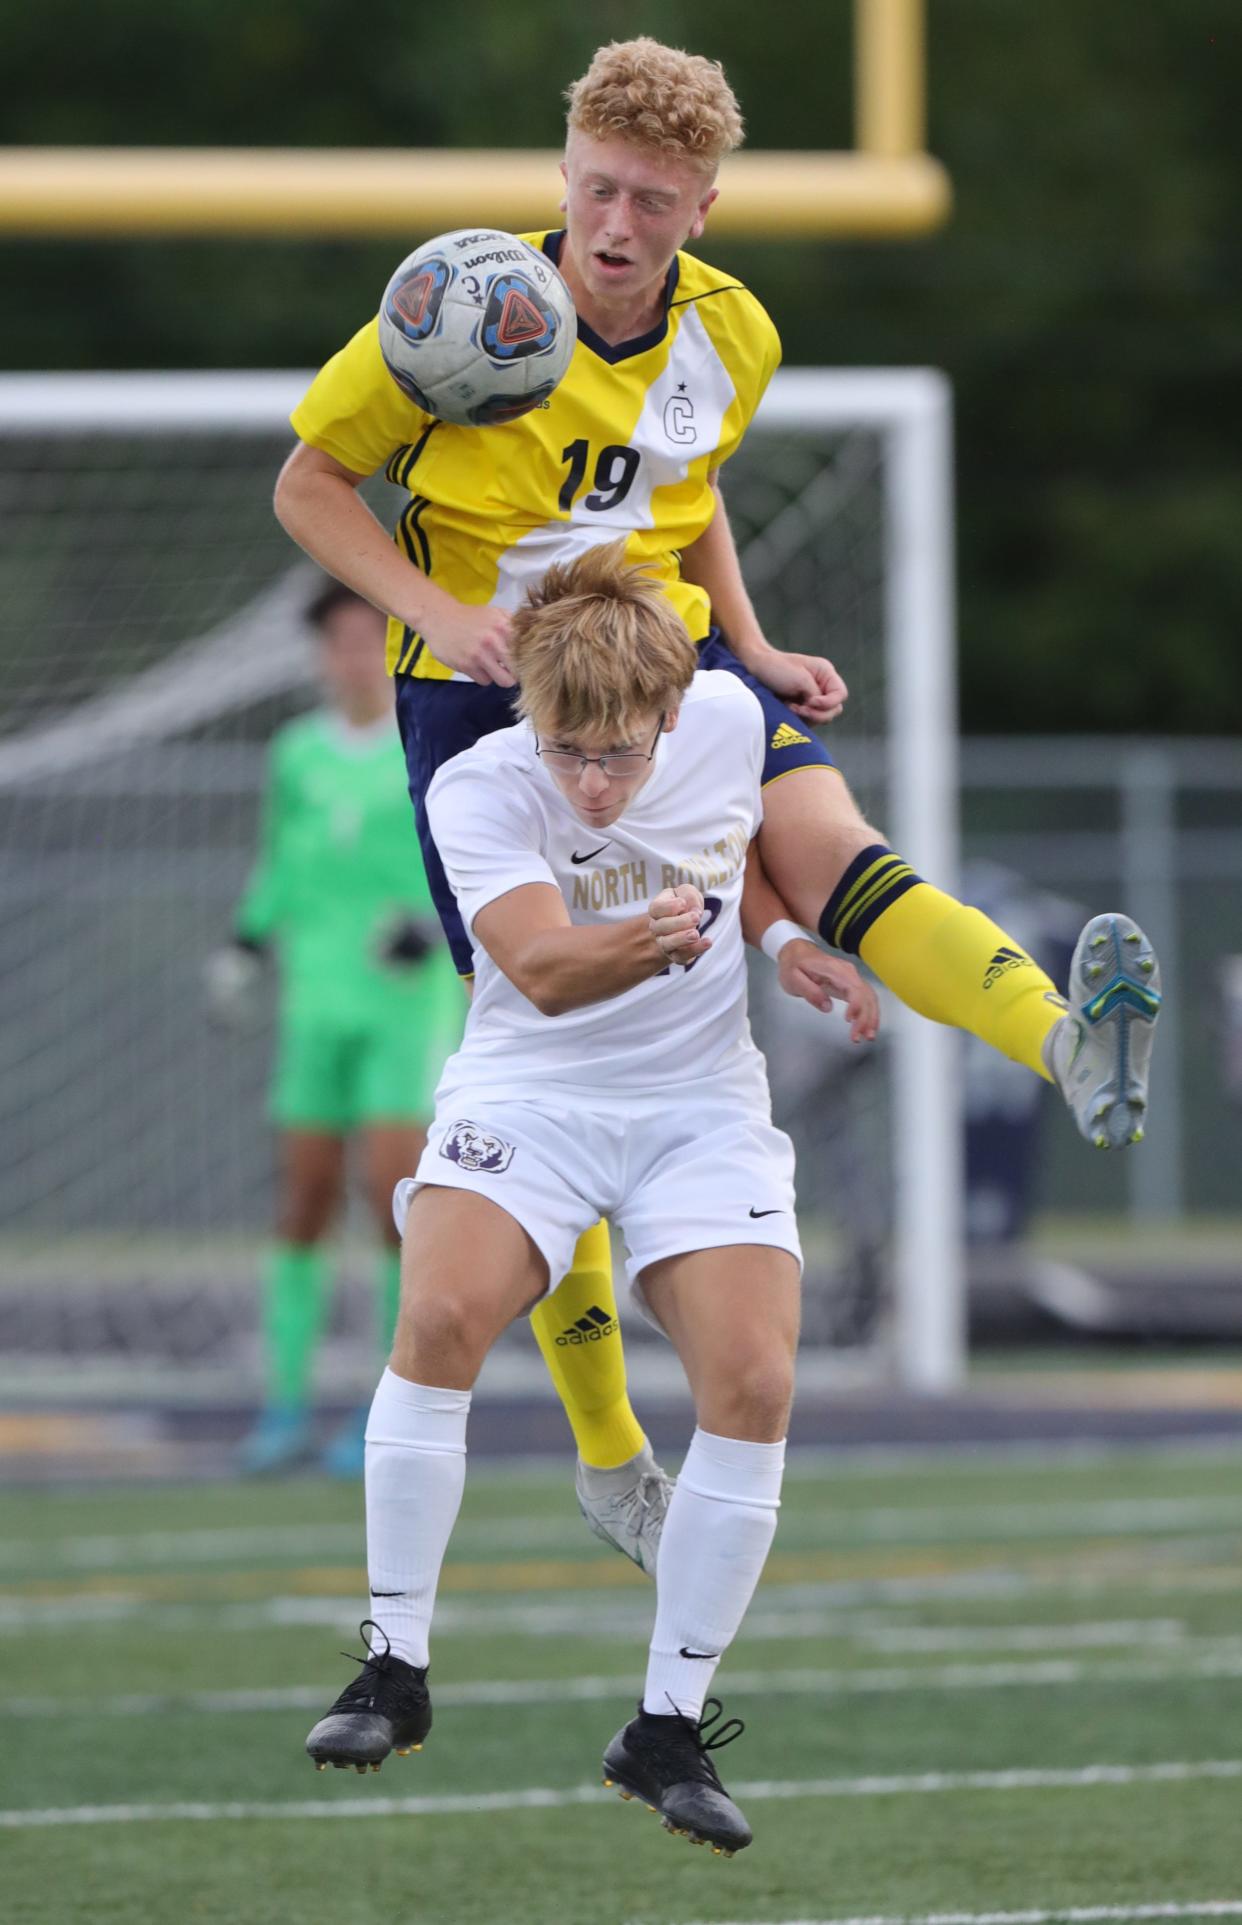 Copley's Asher Hart heads the ball over North Royalton's Tommy Joniec on Thursday, Aug. 25, 2022 in Copley.